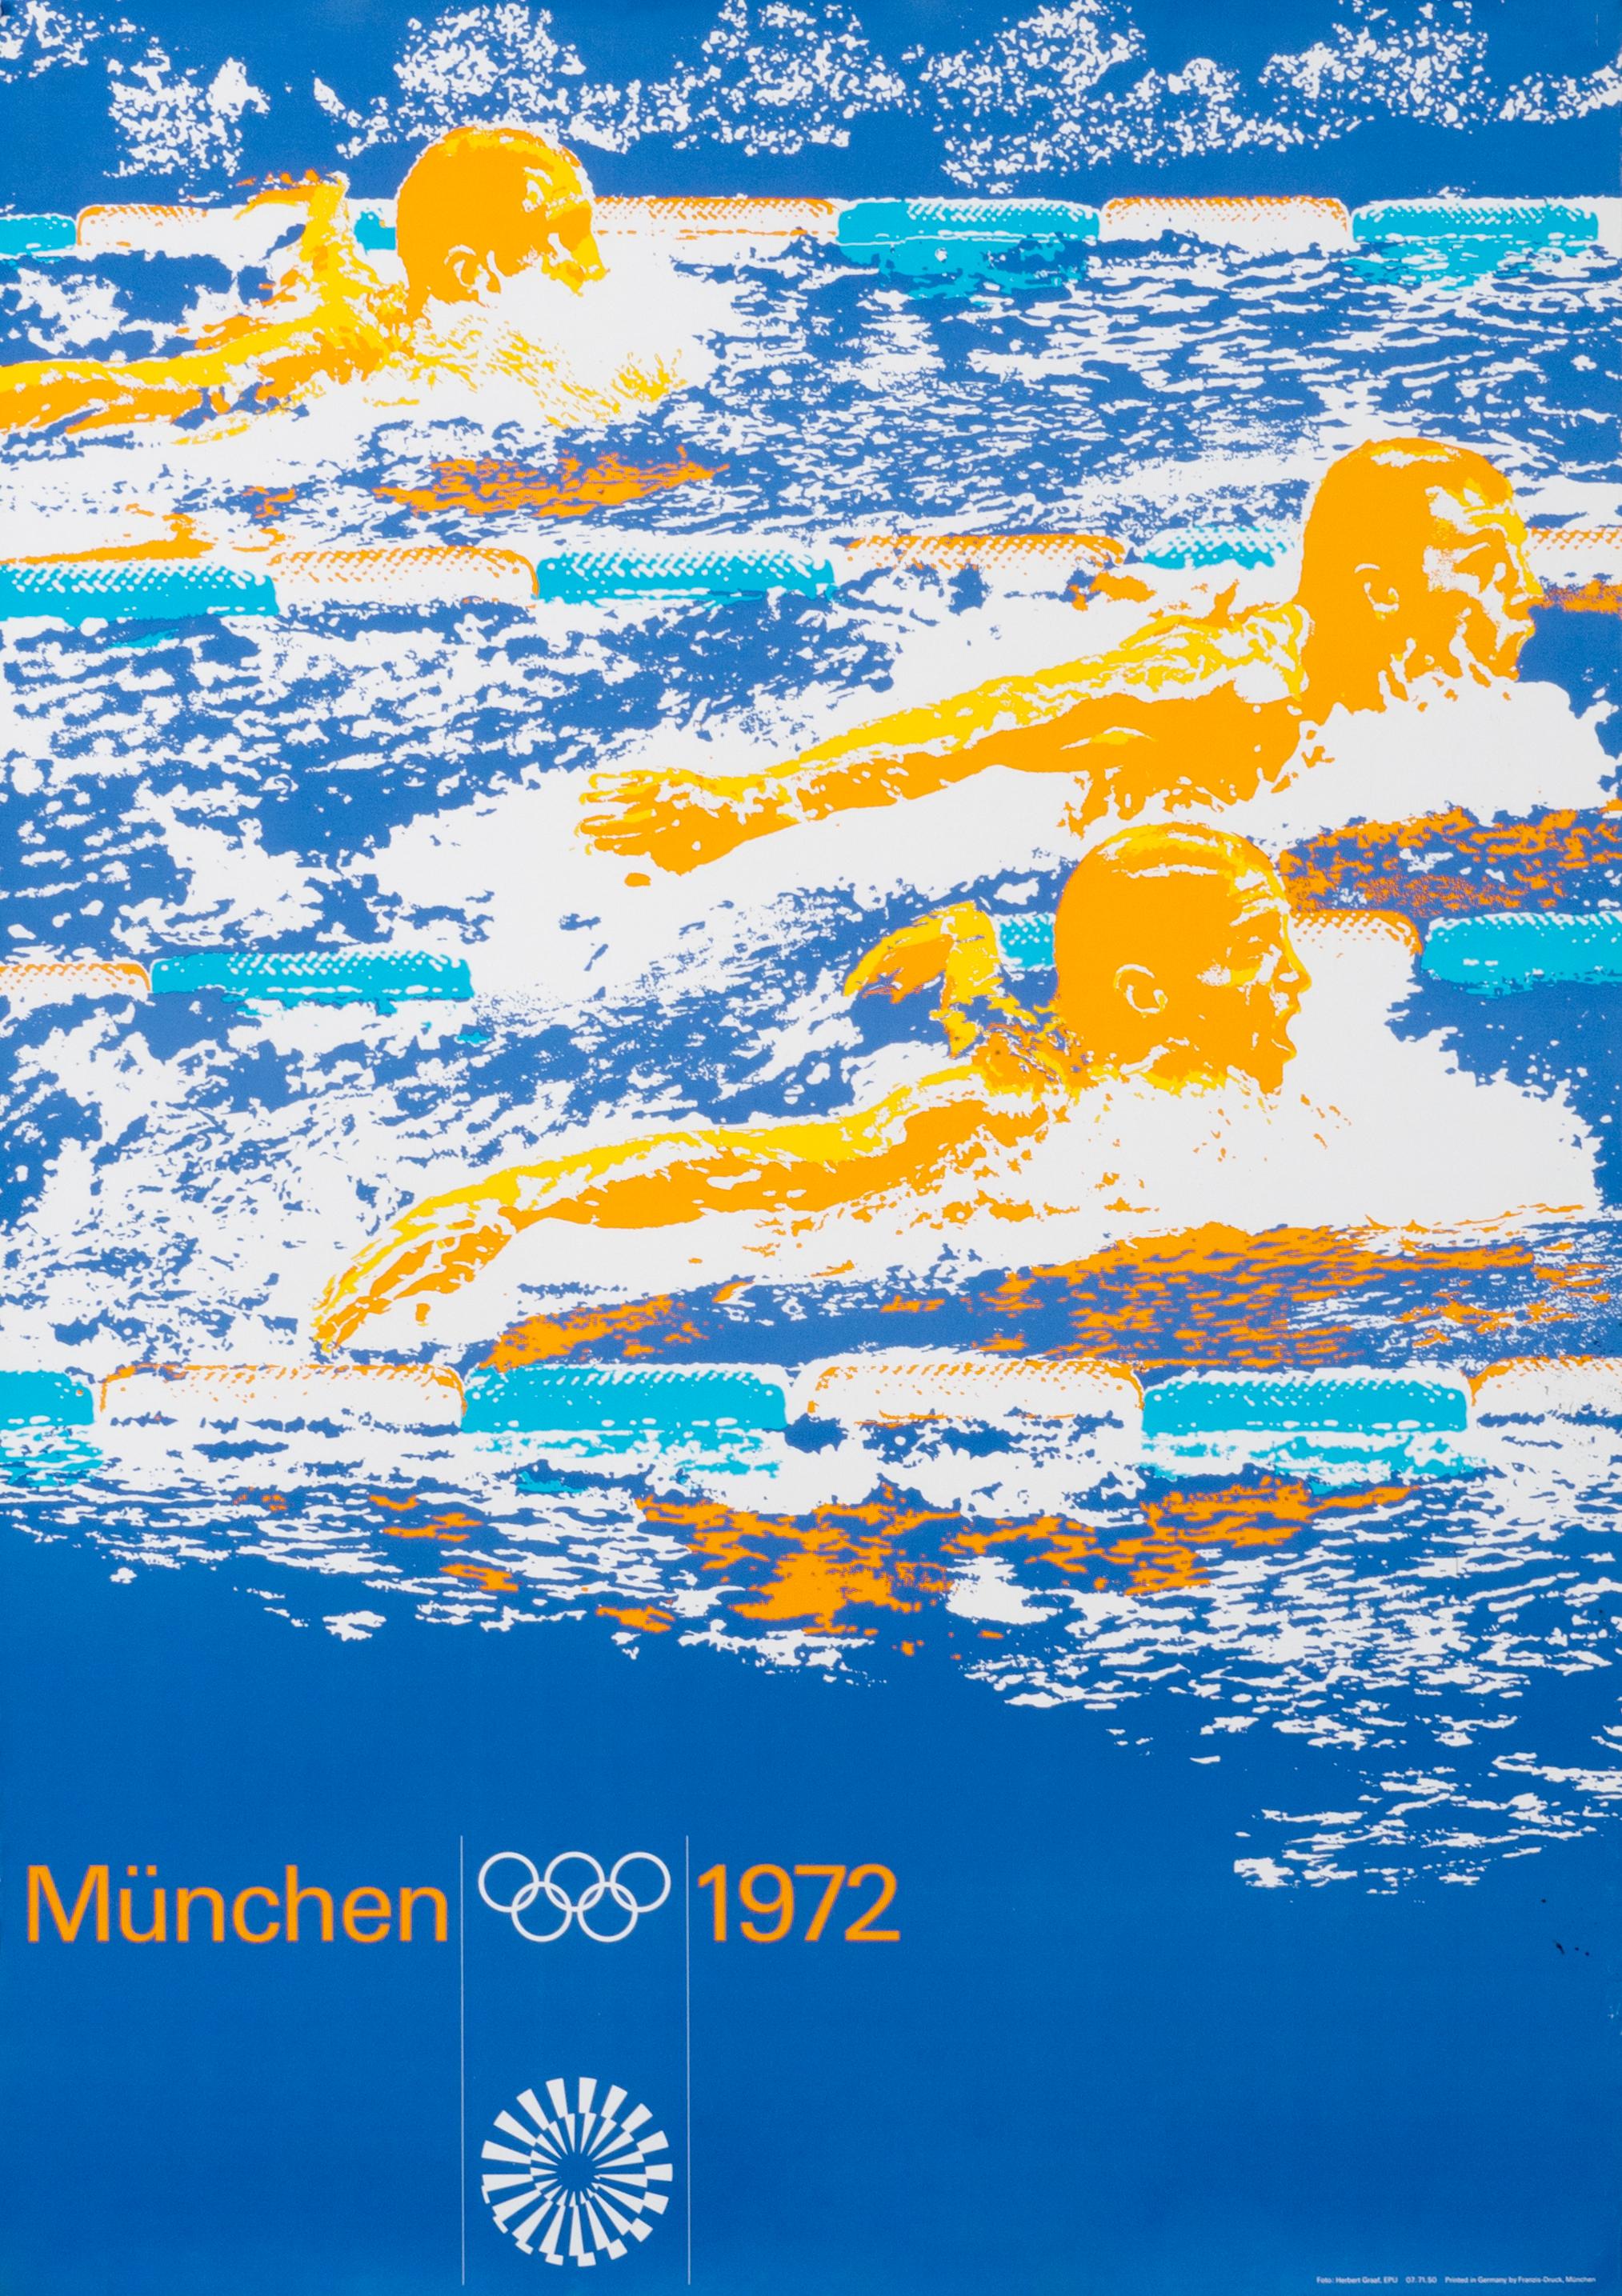 "Olympic Games 1972 - Swimming (Large)" Munich Sports Original Vintage Poster - Print by Otl Aicher